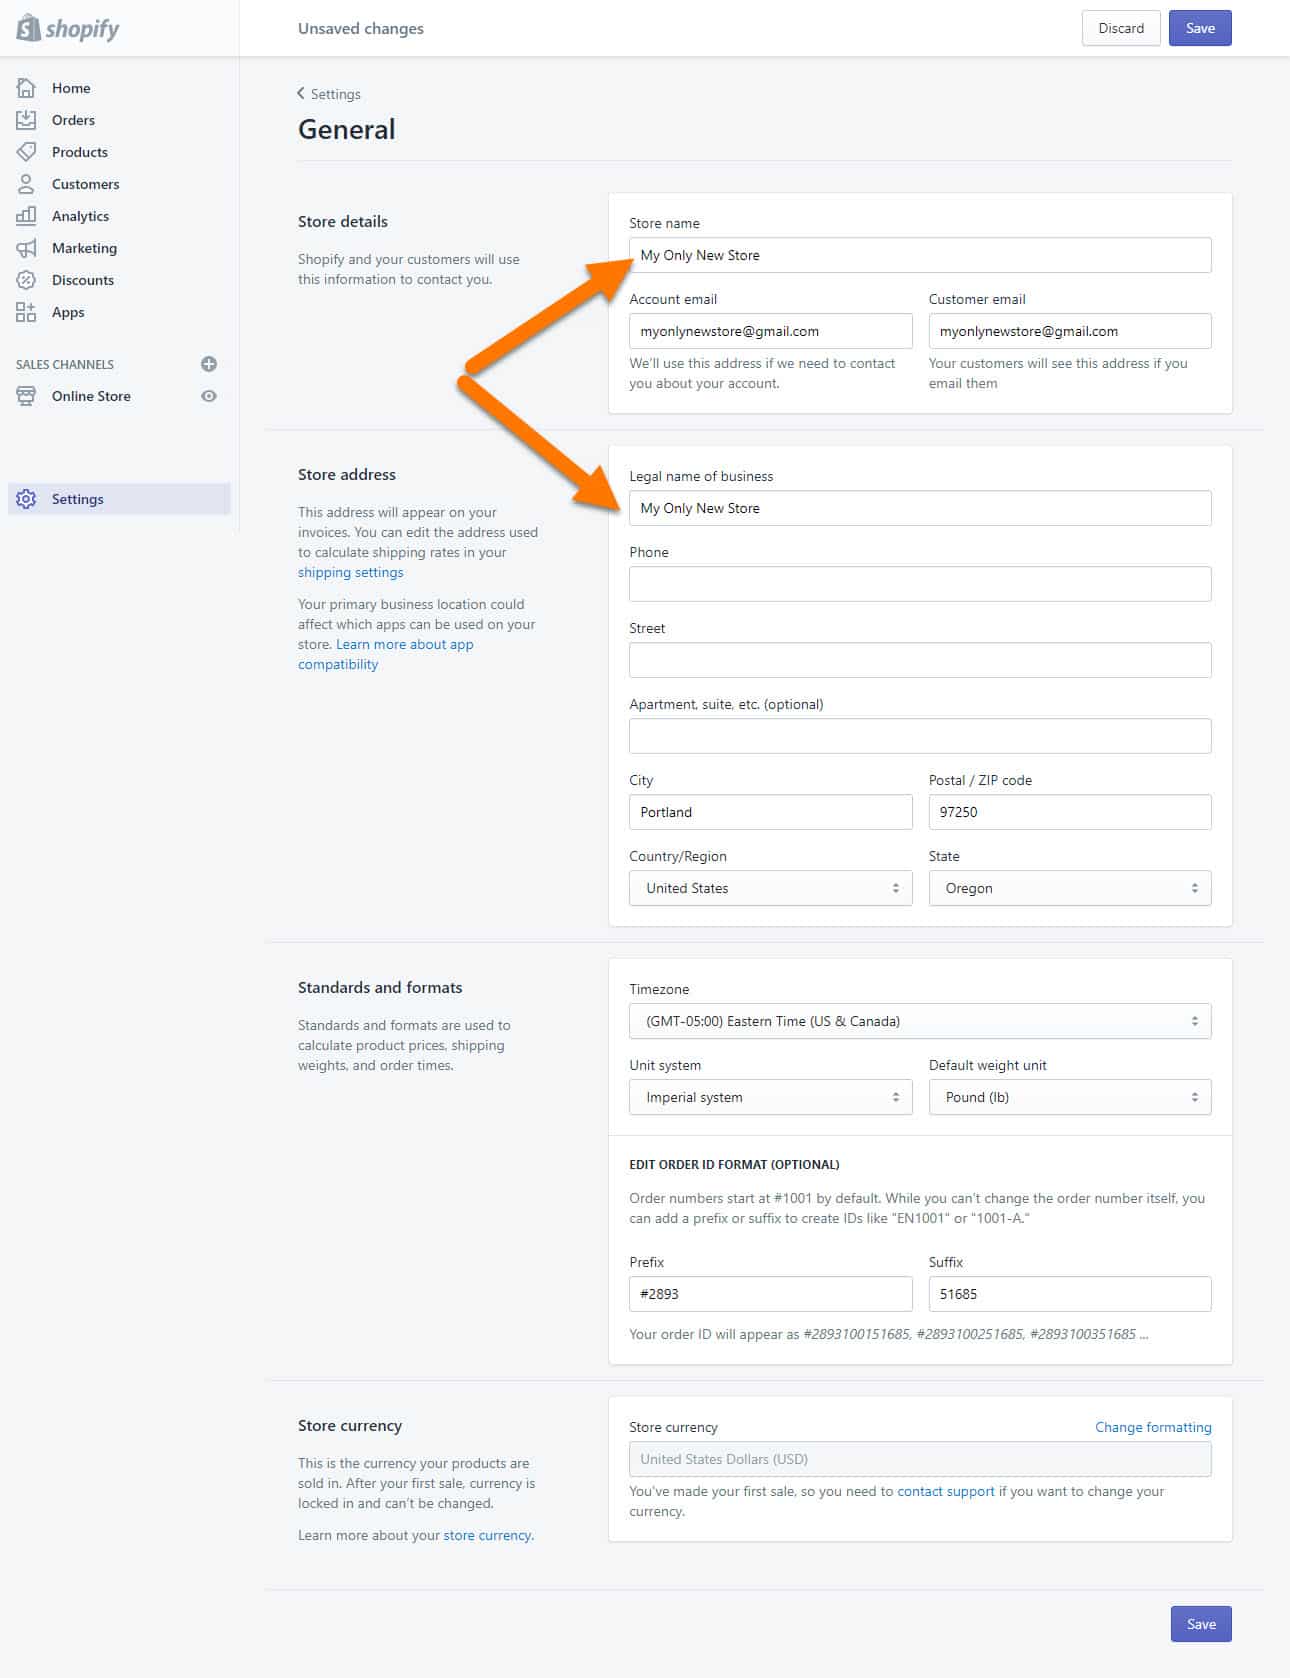 Shopify-General-Settings-Page